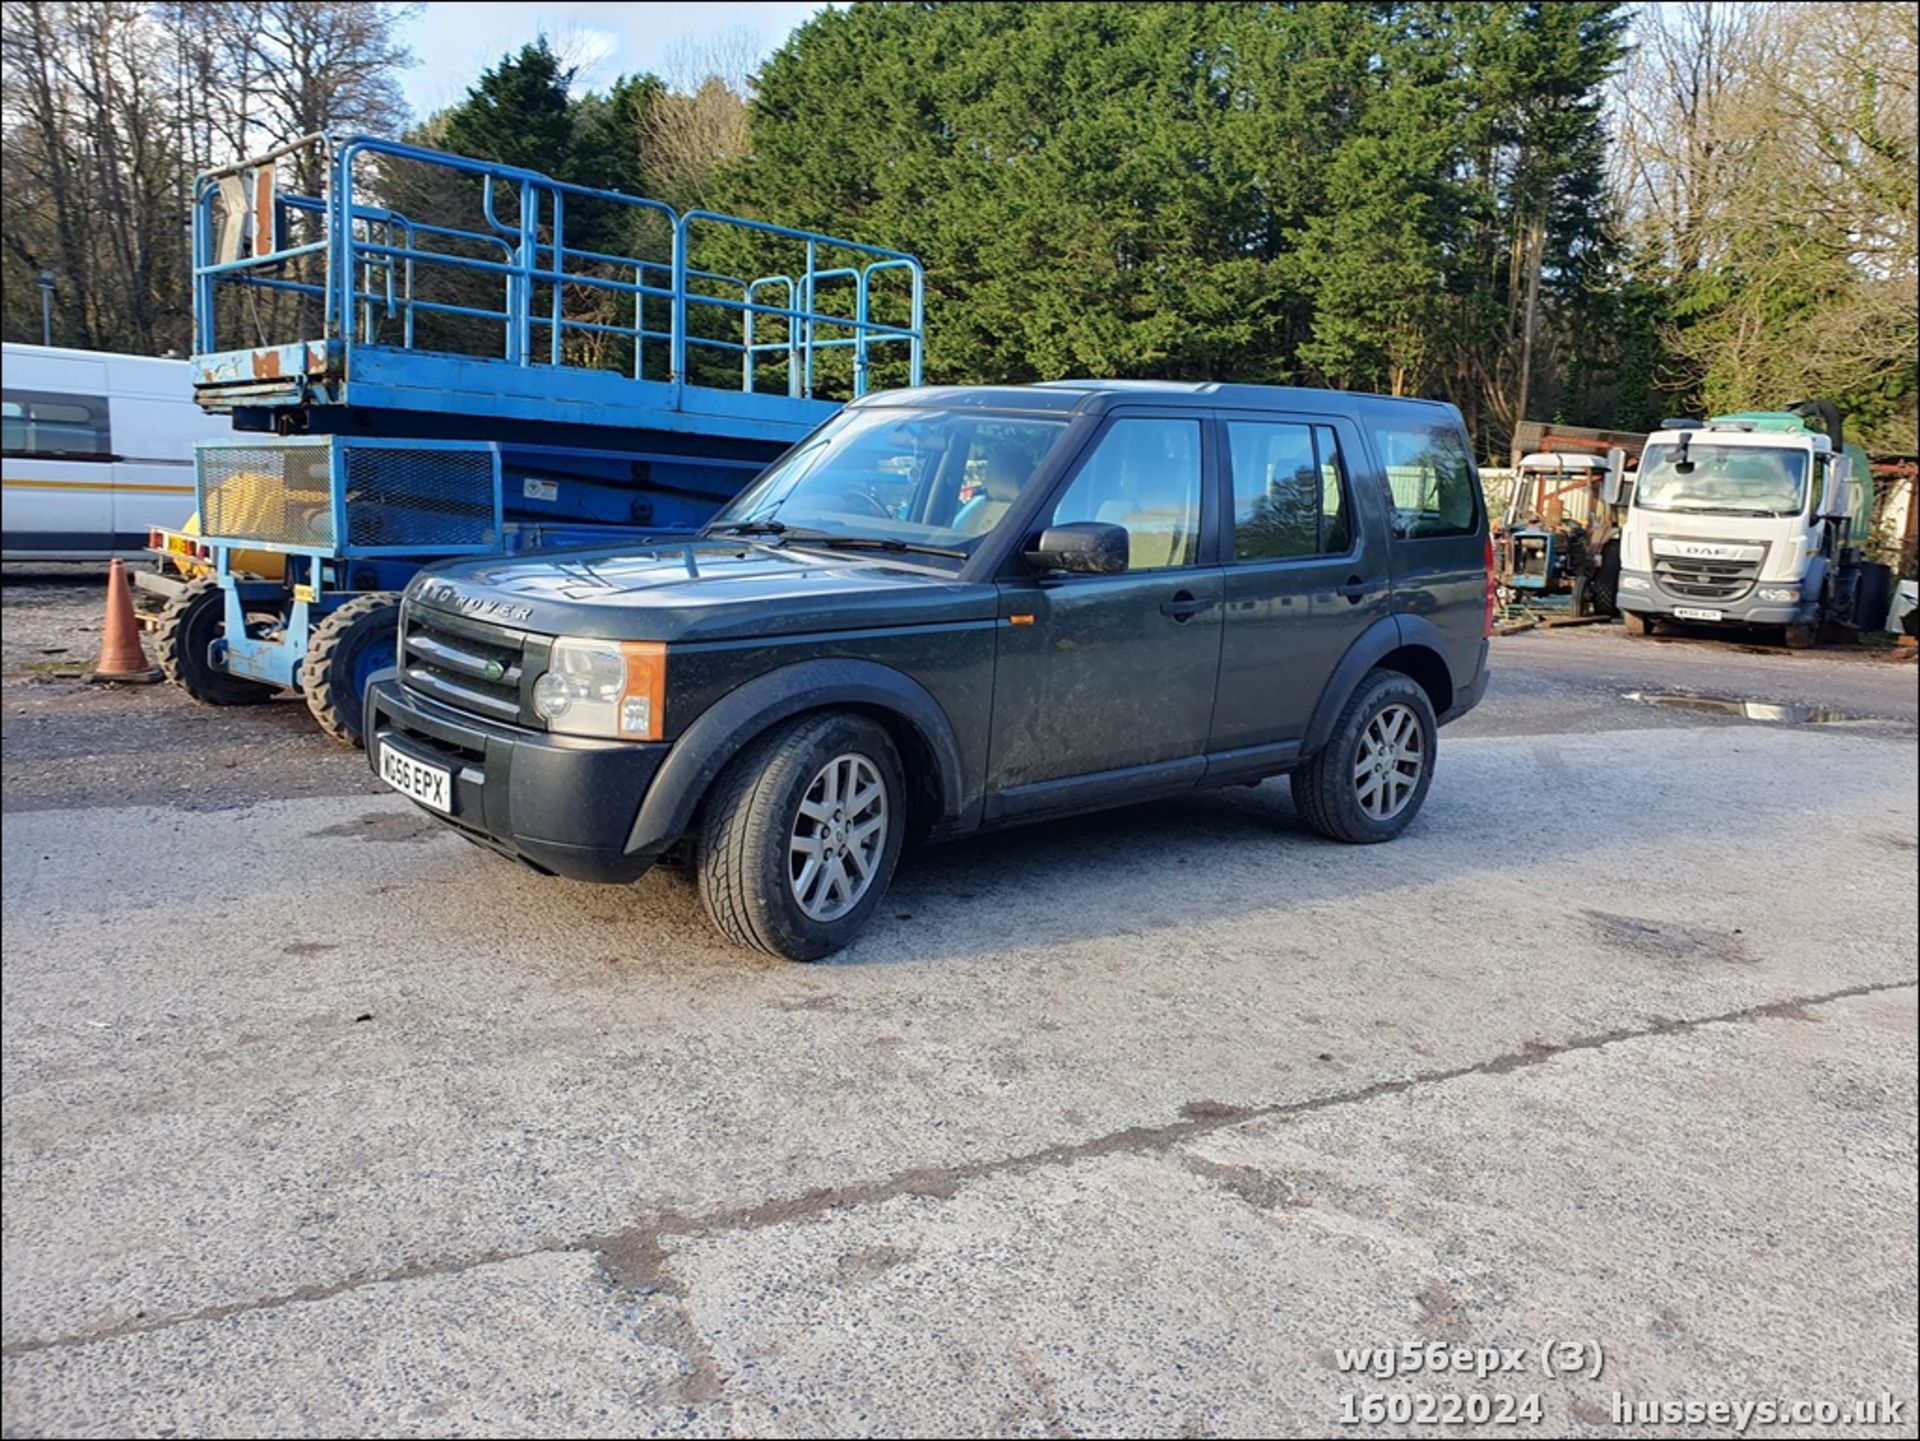 06/56 LAND ROVER DISCOVERY TDV6 GS - 2720cc 5dr Estate (Green) - Image 2 of 44